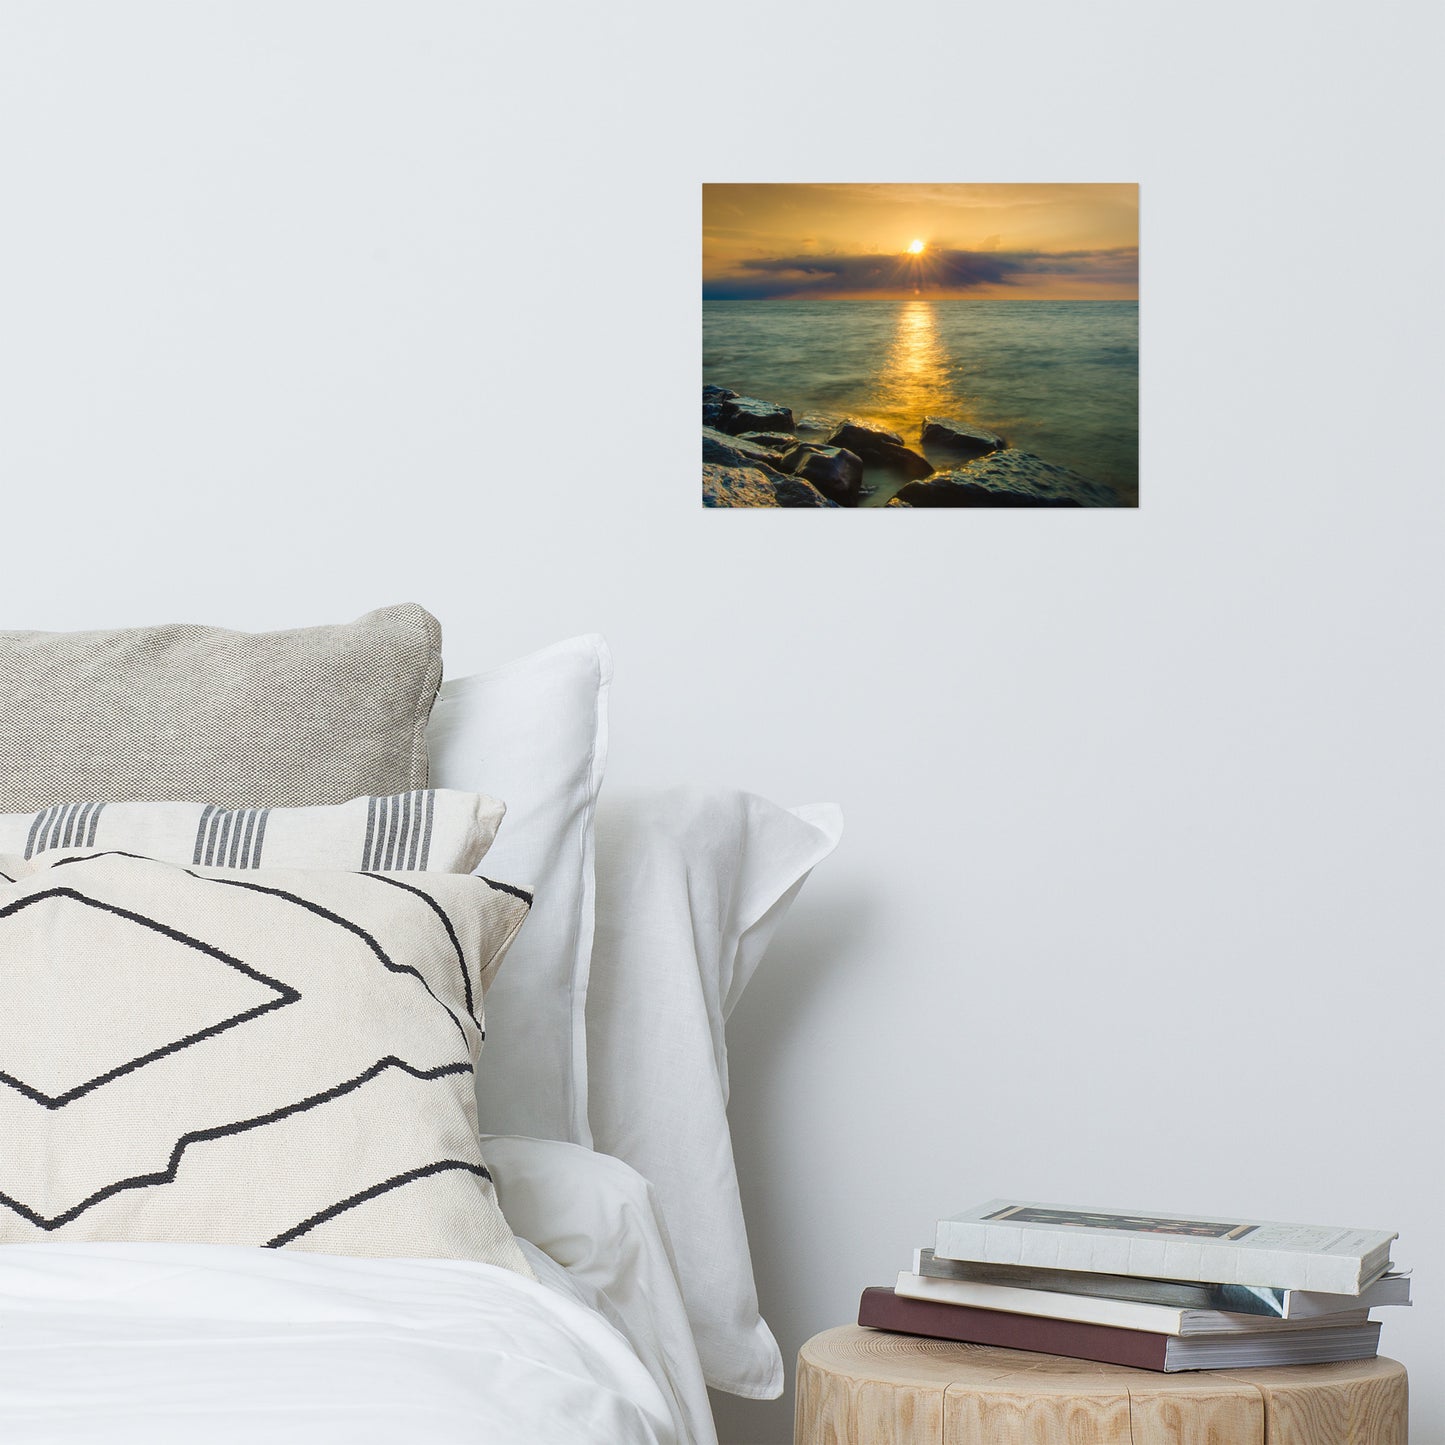 Sun Ray on the Water Landscape Photo Loose Wall Art Prints